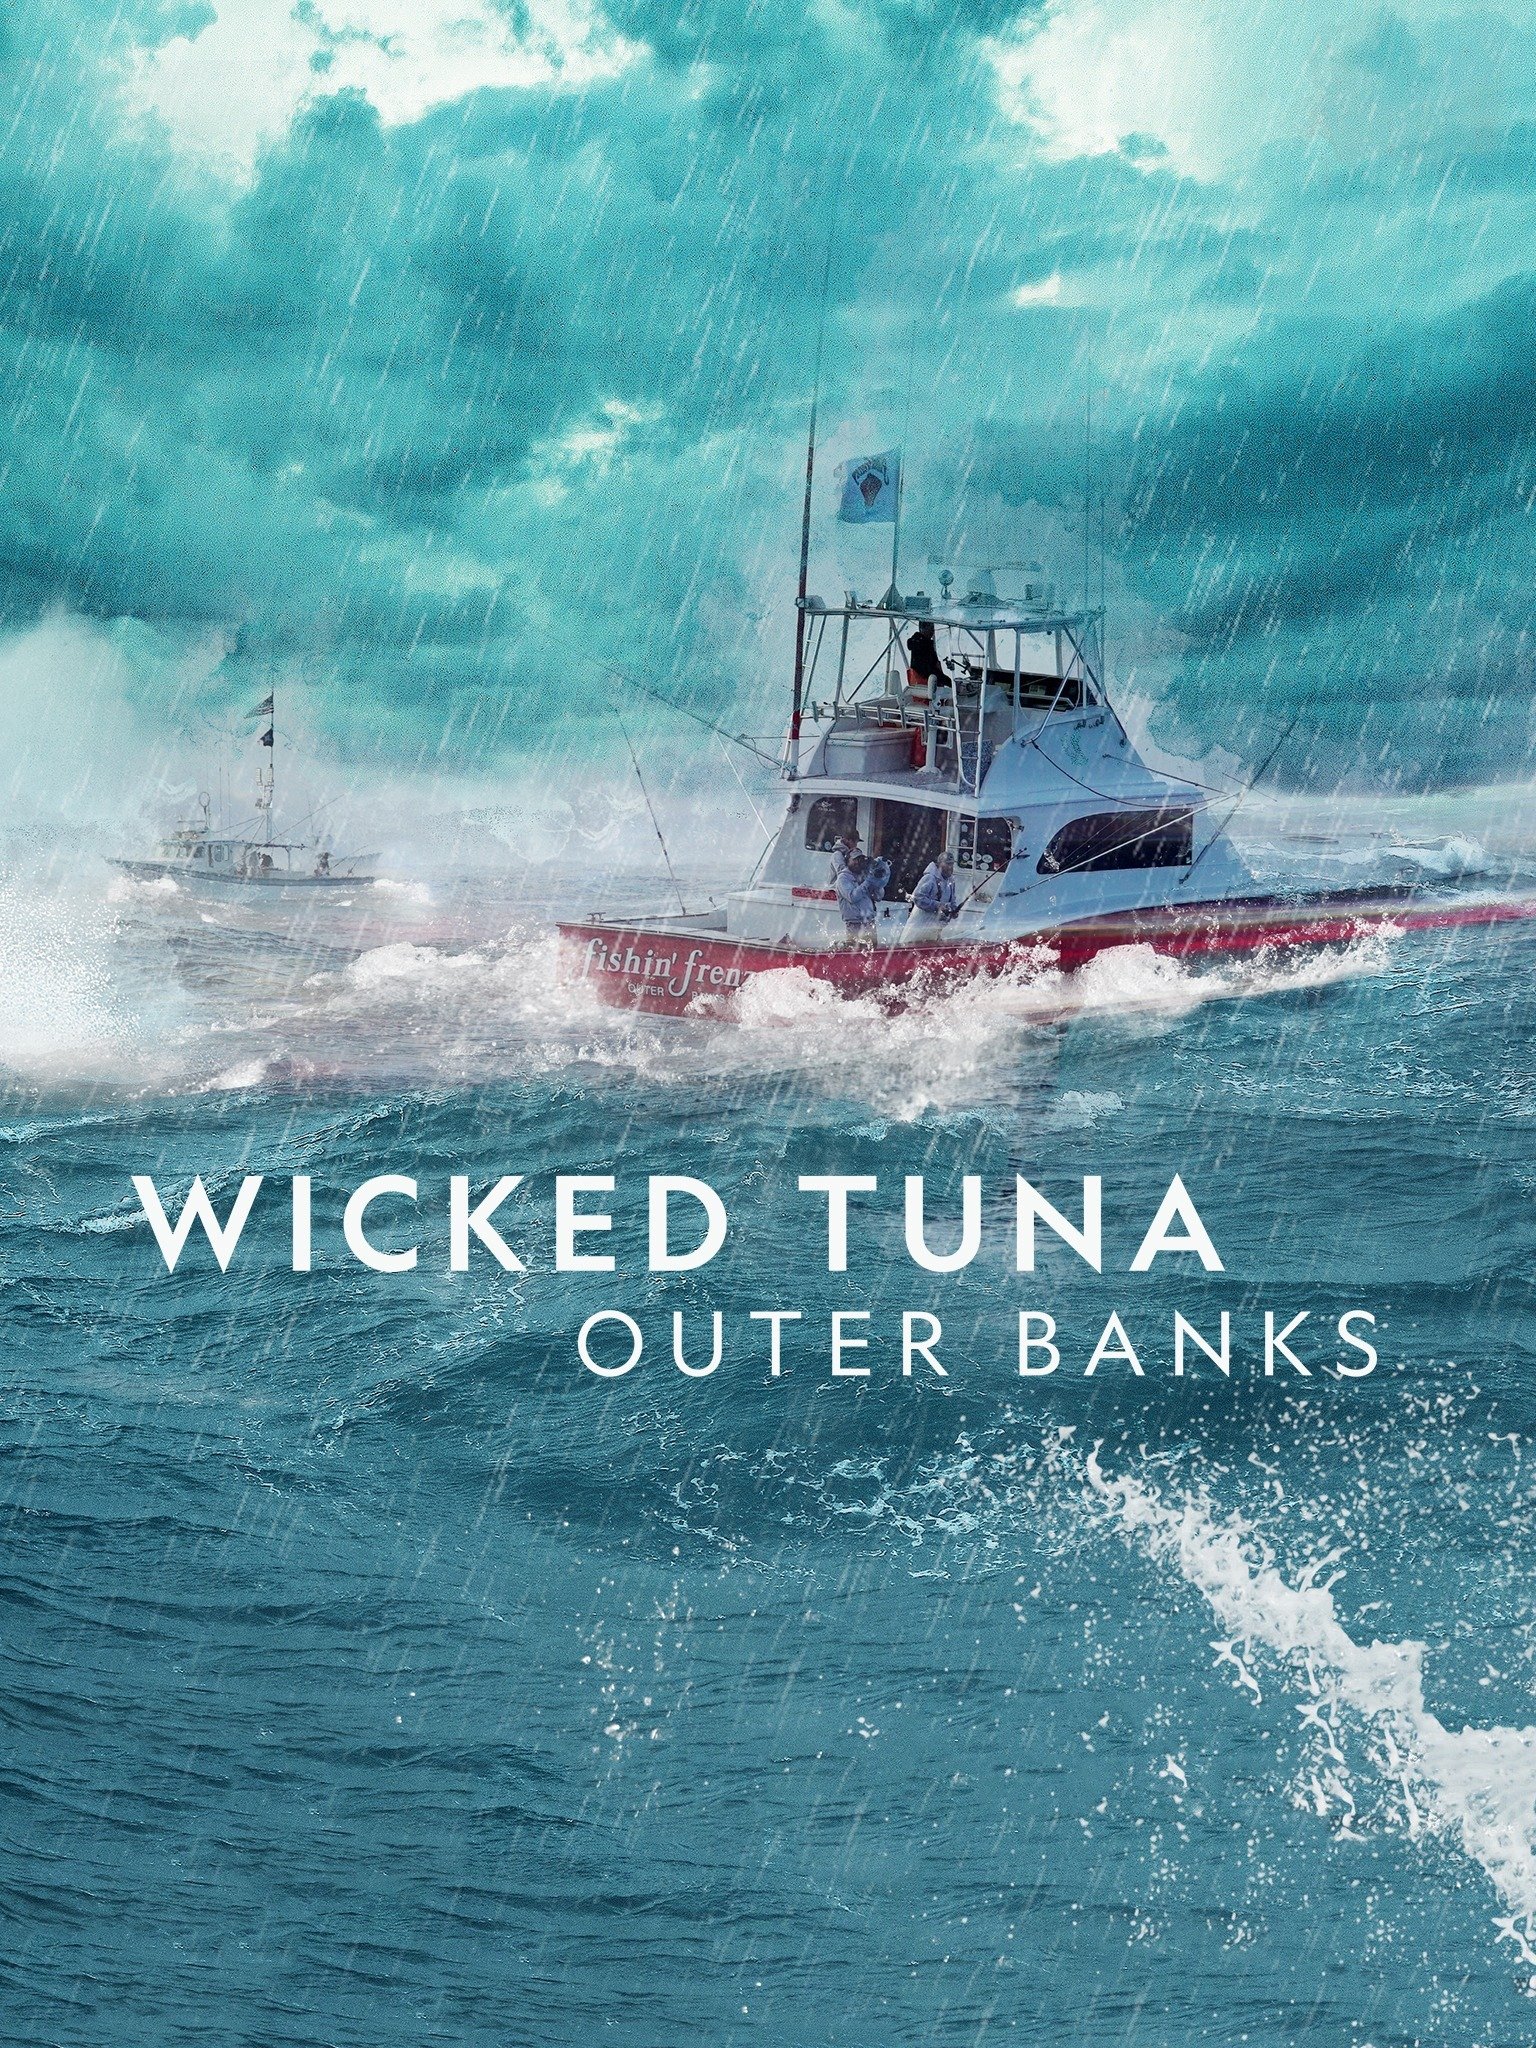 Wicked Tuna Outer Banks Season 5 Pictures Rotten Tomatoes